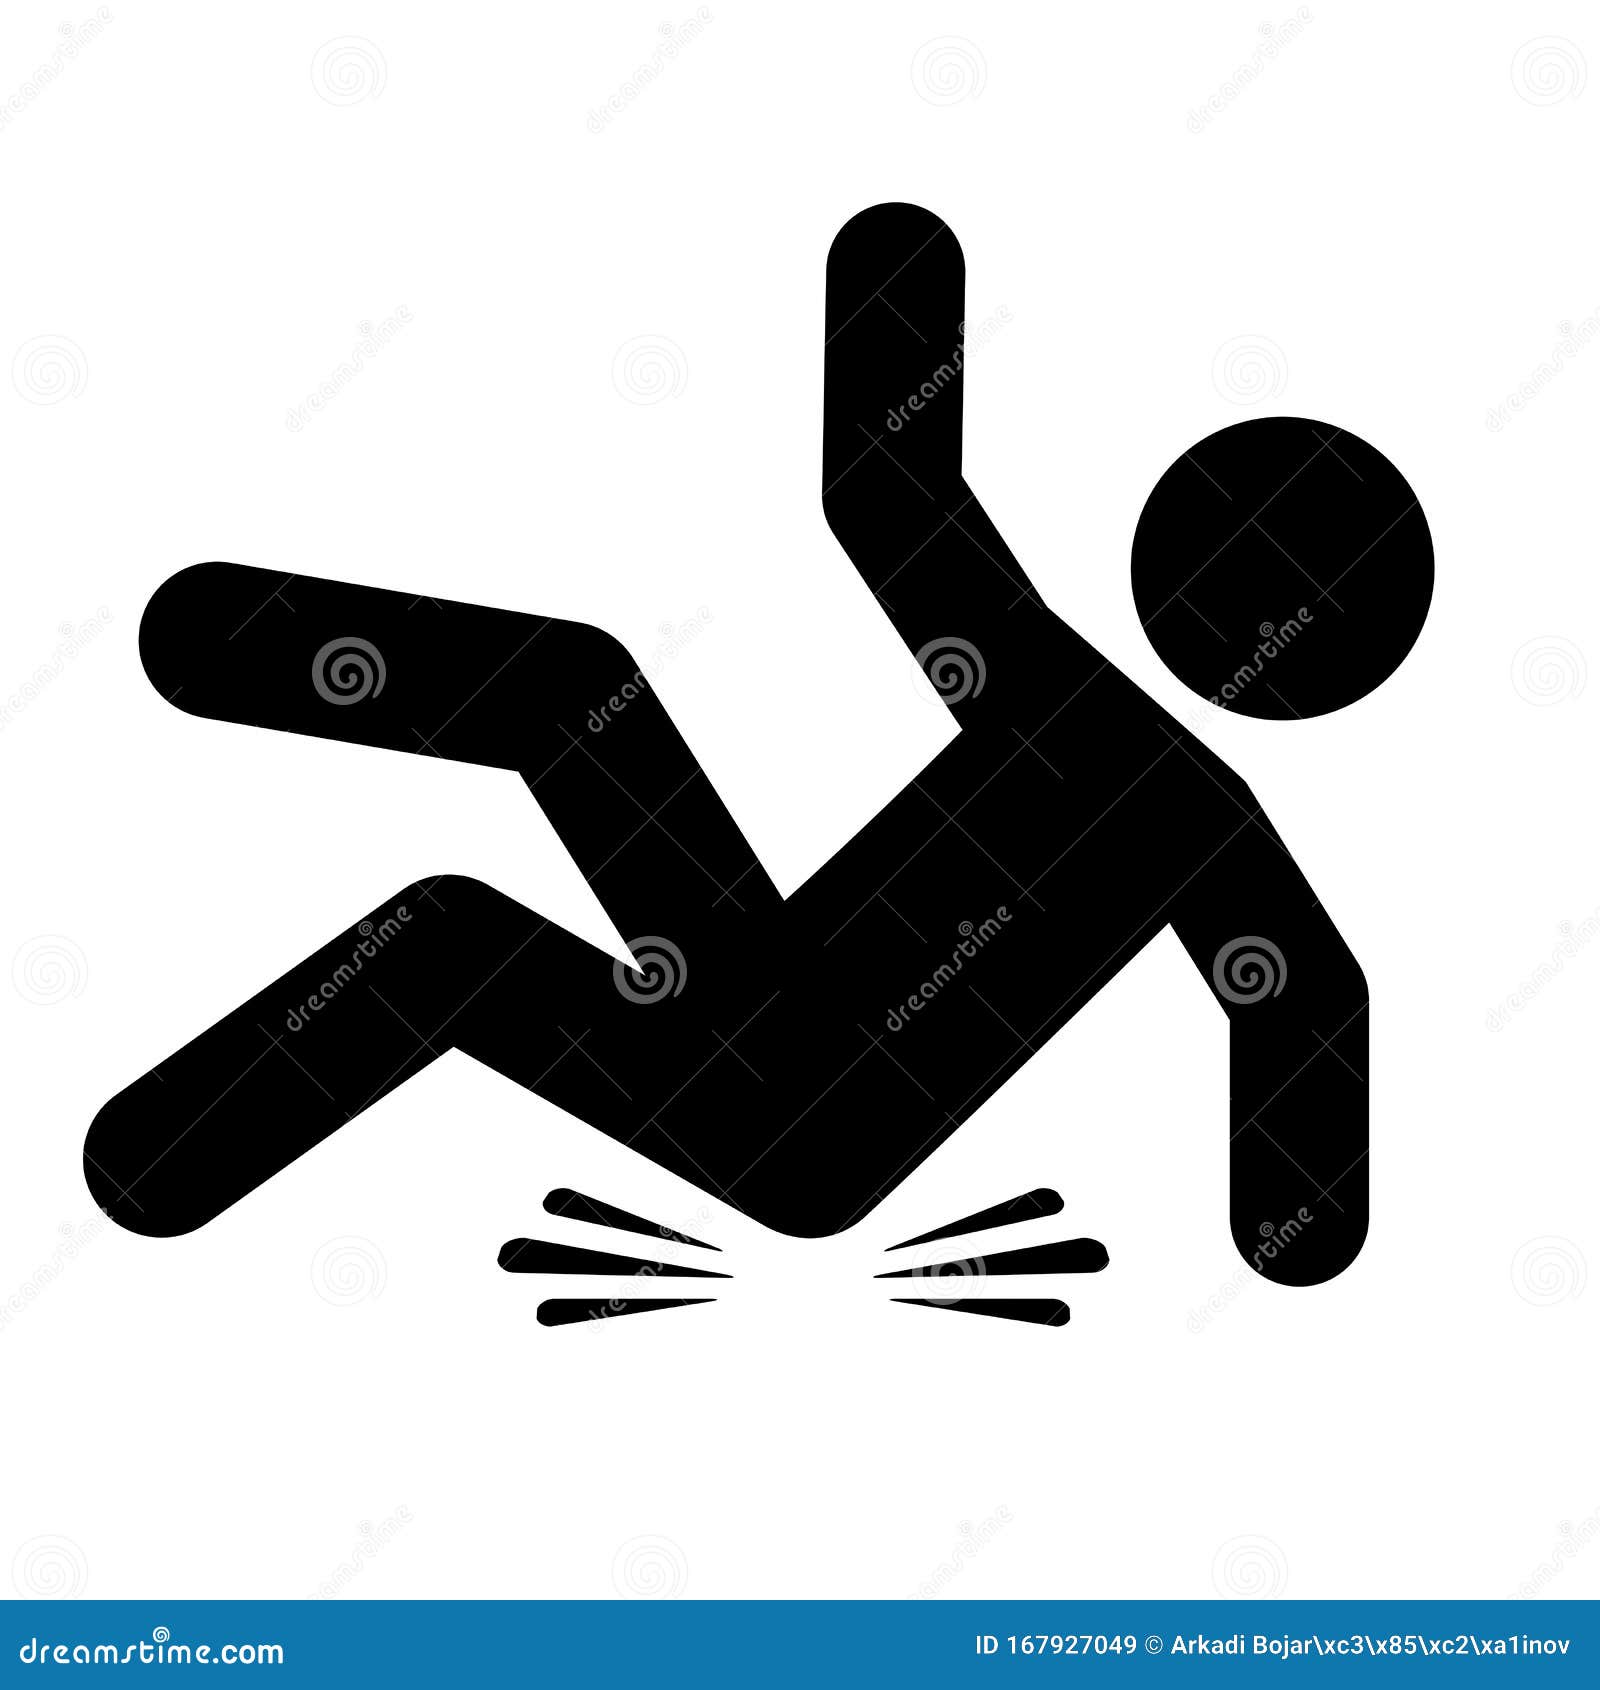 Slip and fall vector icon stock vector. Illustration of alert - 167927049